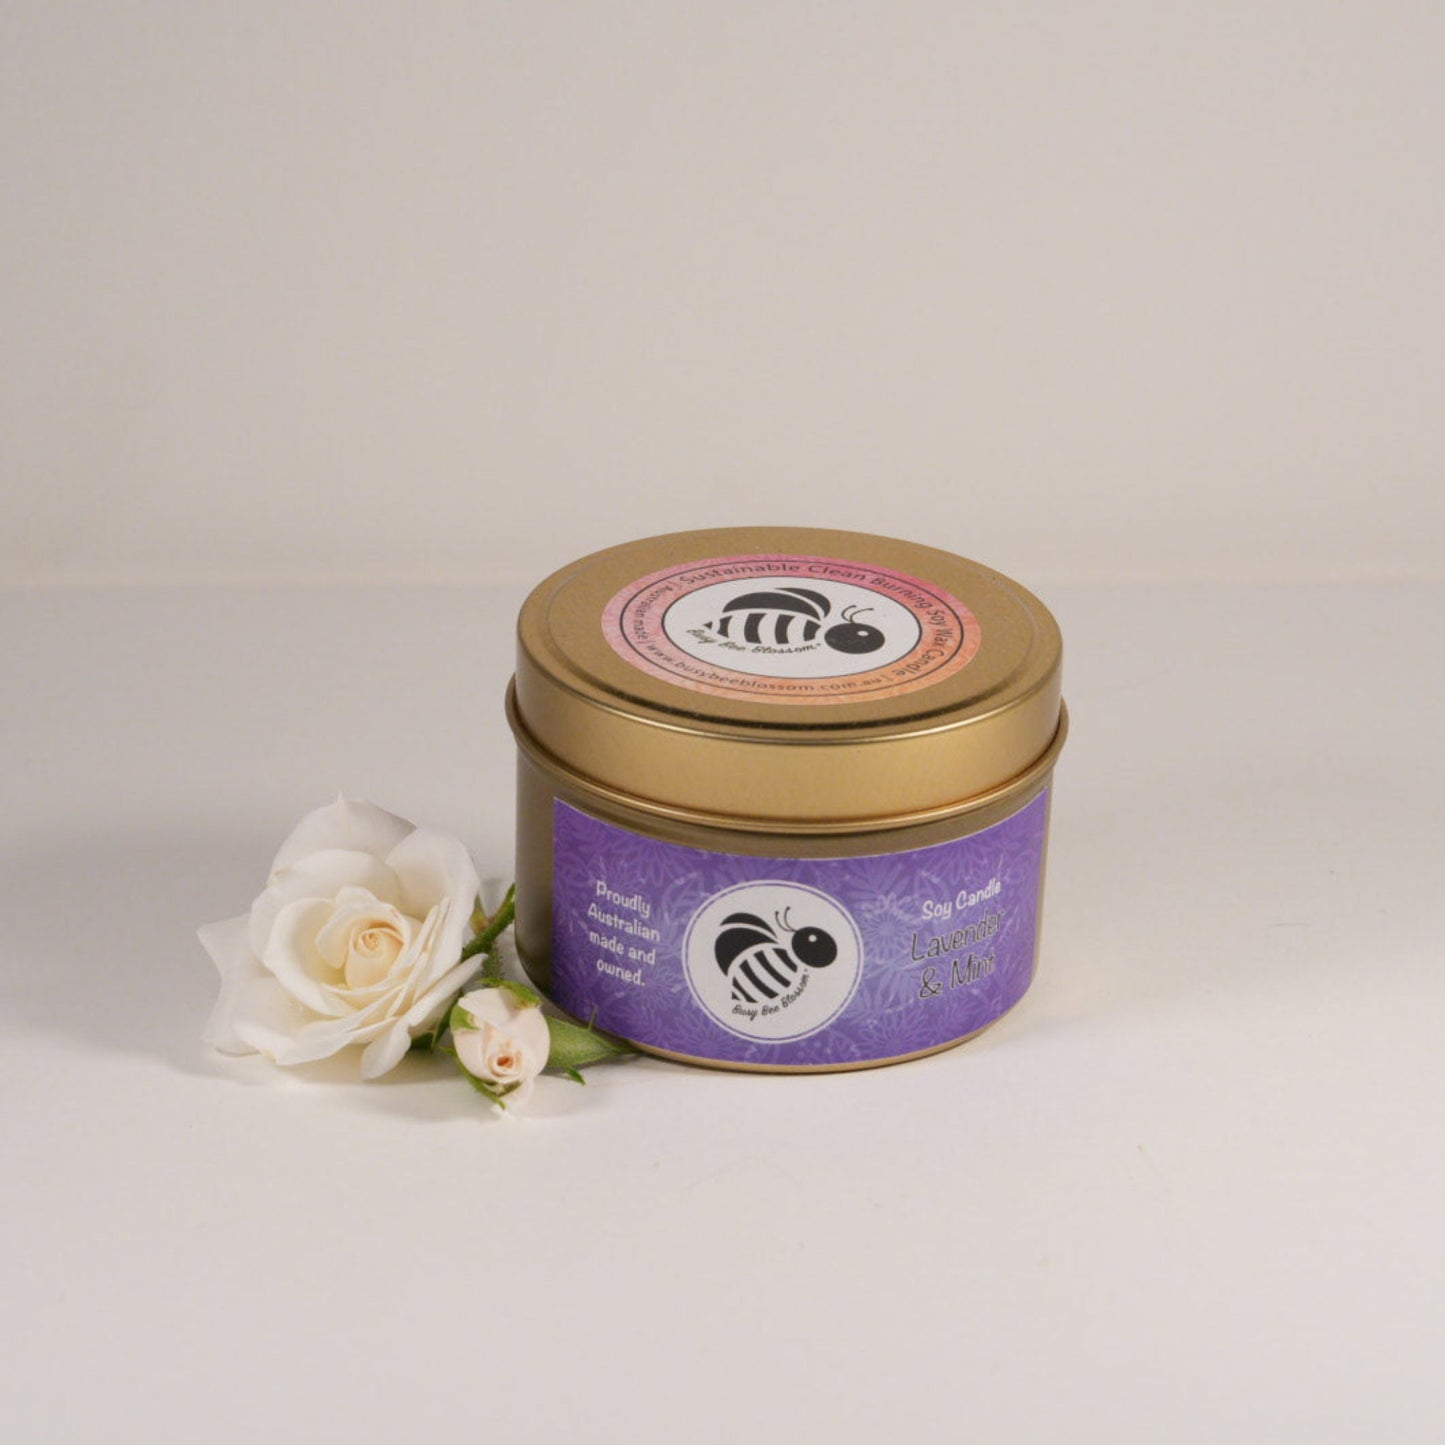 Lavender and Mint Gold Travel Tin Soy Candle with roses